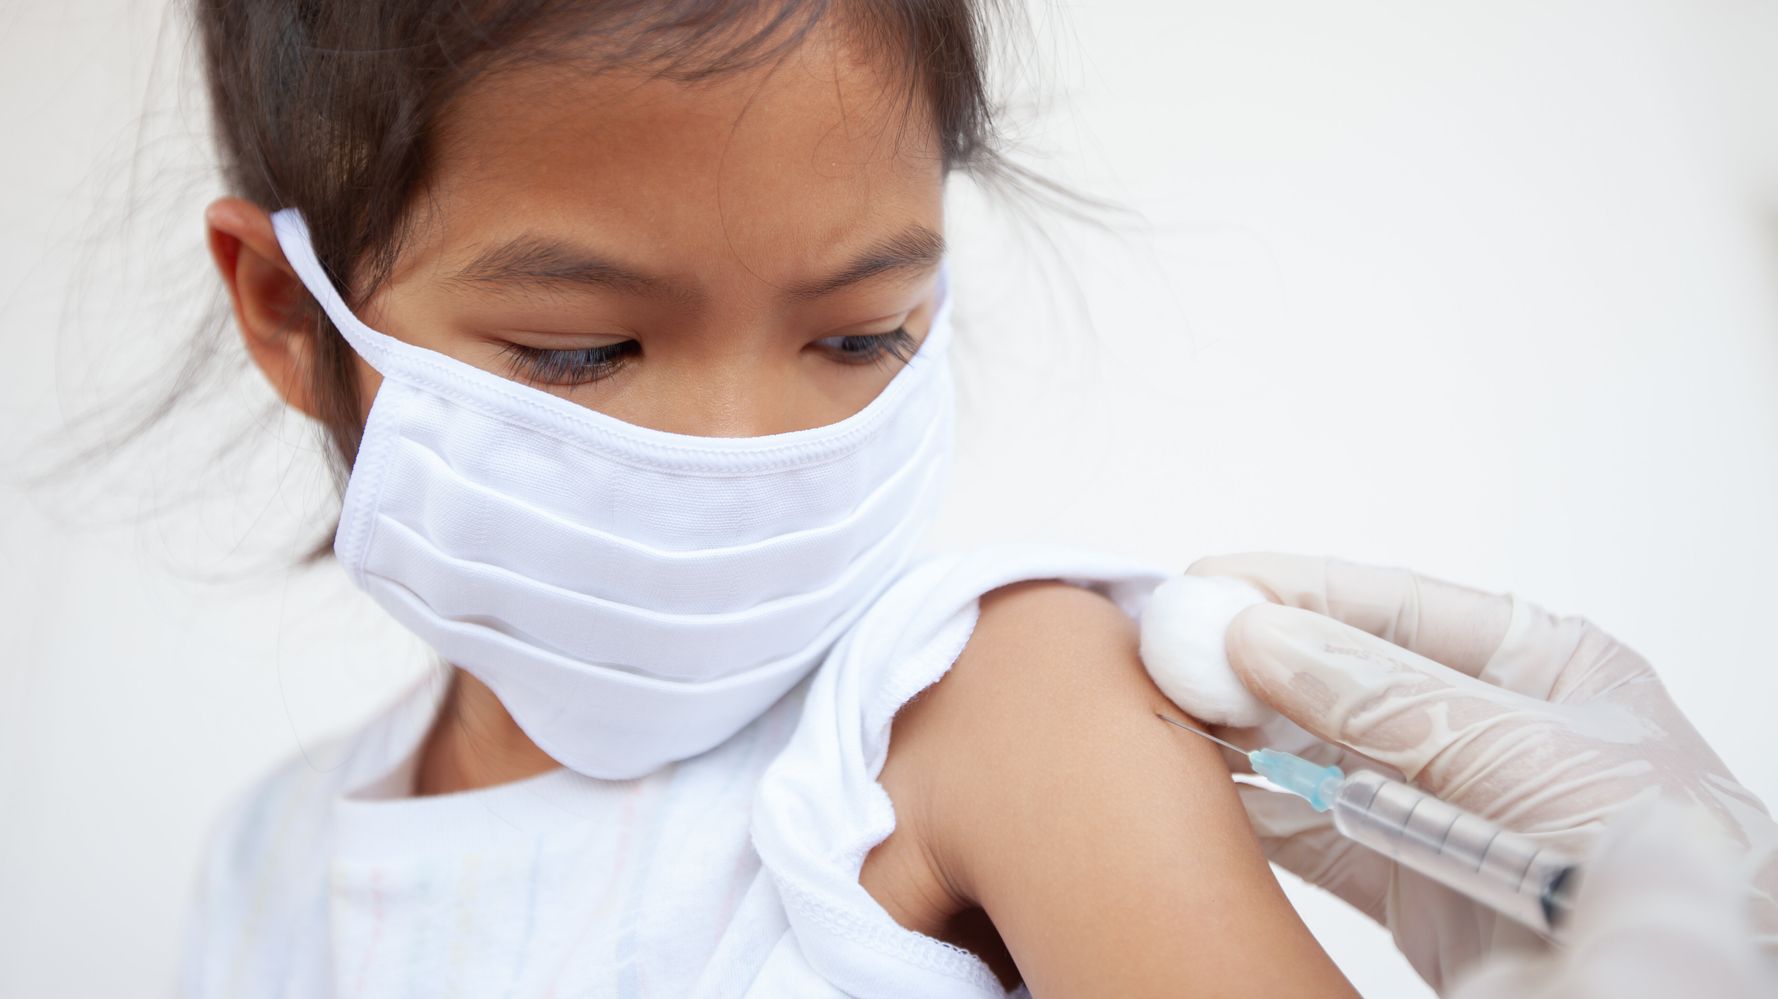 We’re All Waiting For A COVID-19 Vaccine. For Kids, The Wait May Be Much Longer.